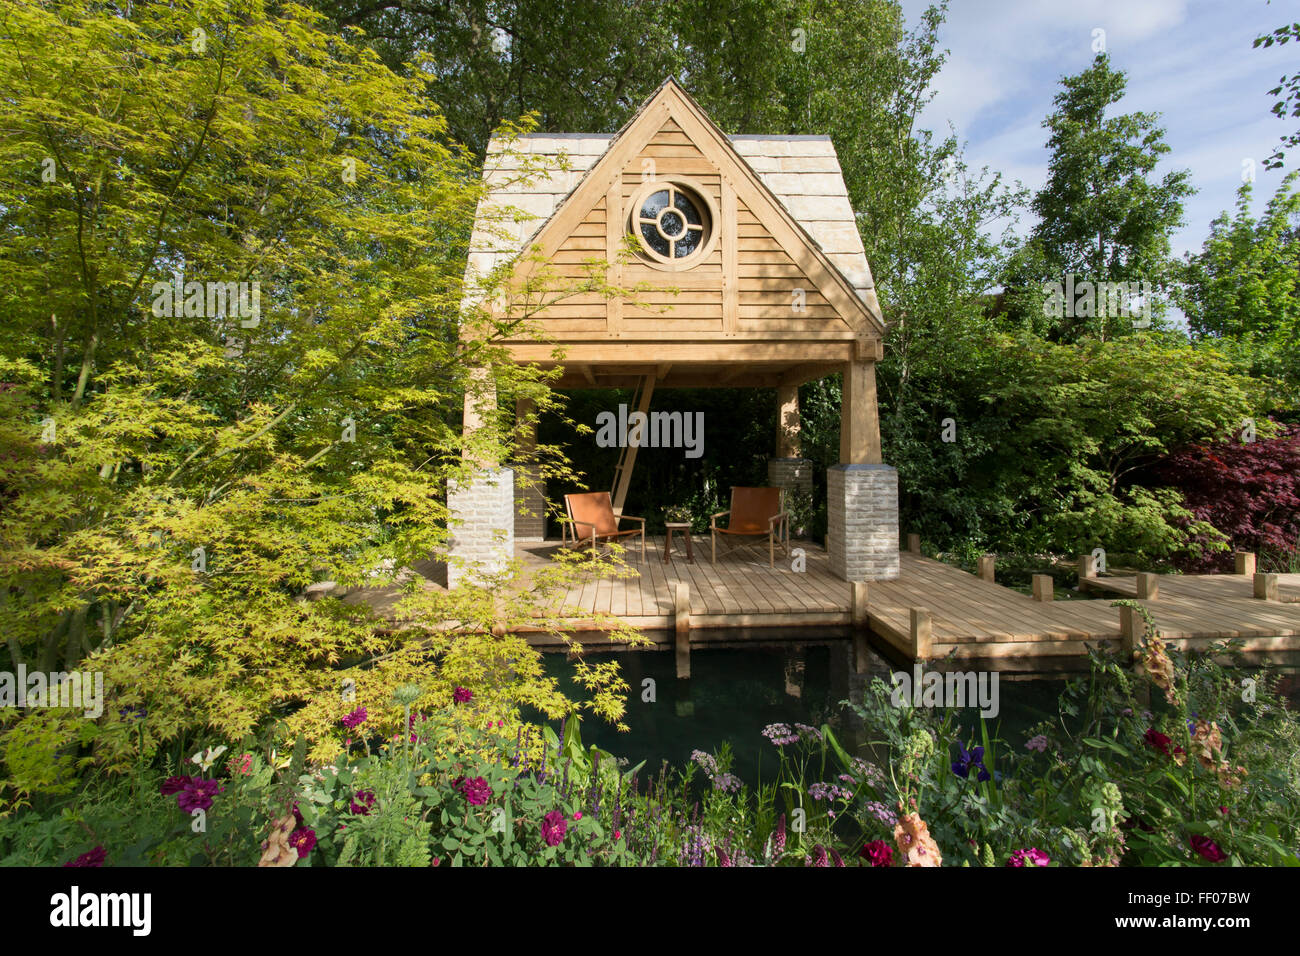 The M & G Garden  The Retreat - oak summerhouse with wooden jetty over natural swimming pool - pond wild swimming - Chelsea Flower Show - England UK Stock Photo